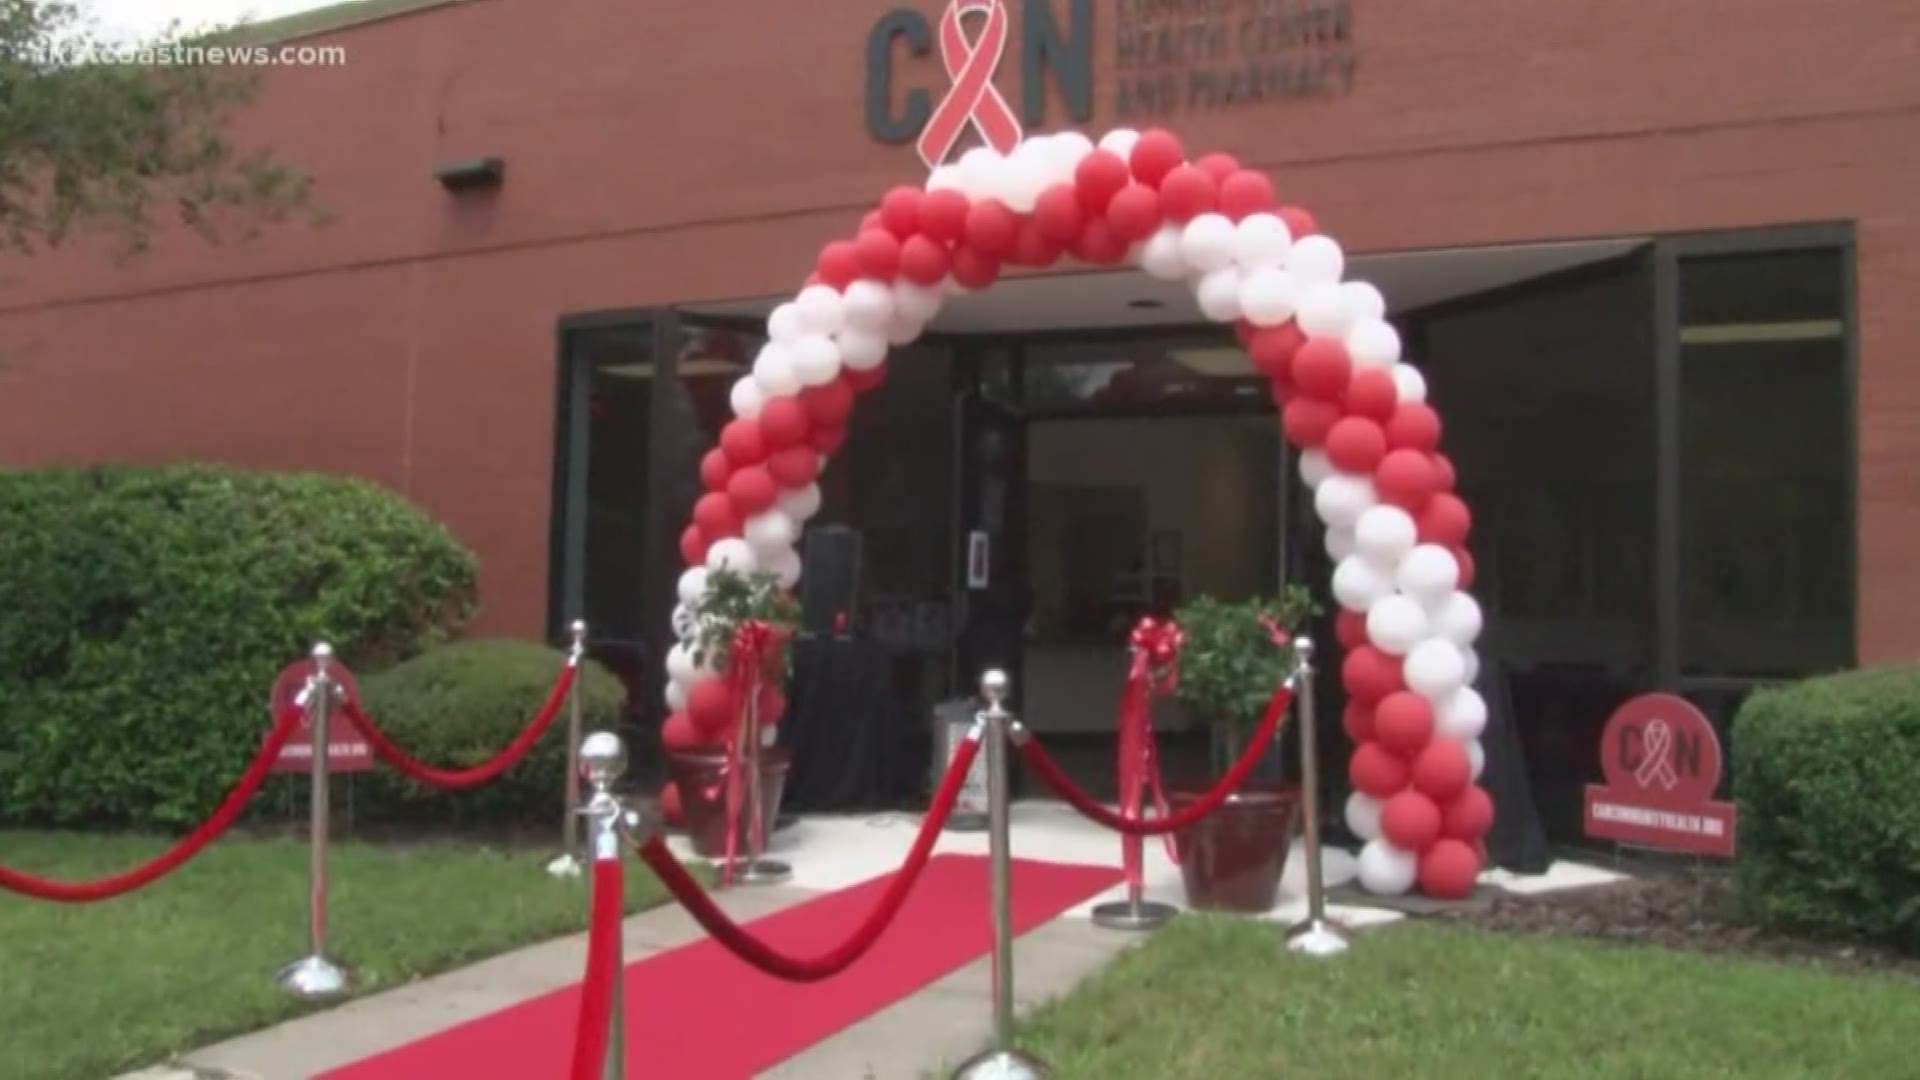 This new clinic will provide access for people in need of healthcare and regular doctor's visits to ensure they can live happy and healthy lives with HIV.